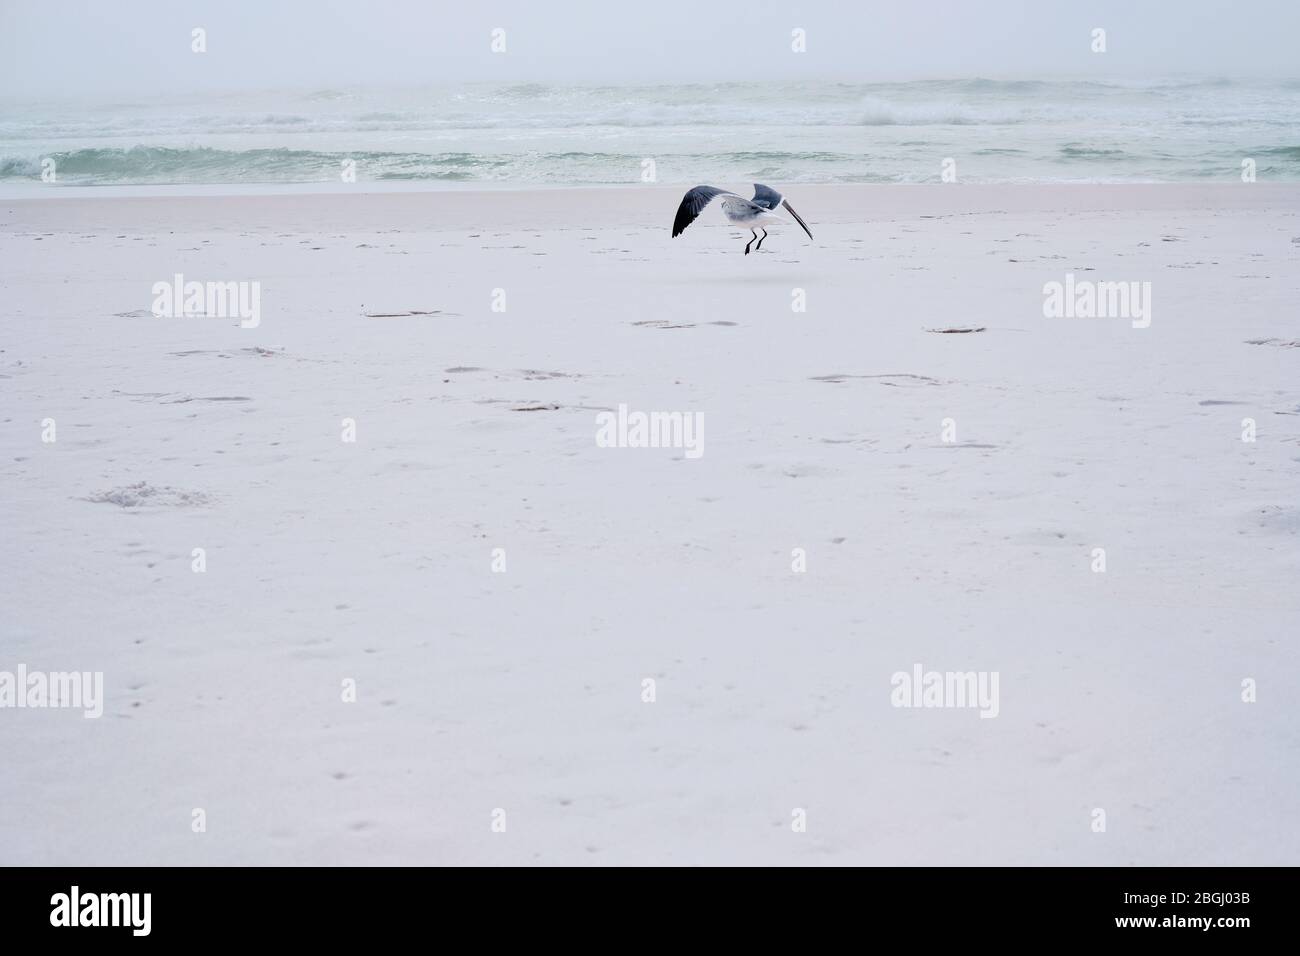 Seagull about to land on pure white sand of Destin beach on Florida's Panhandle coast Stock Photo